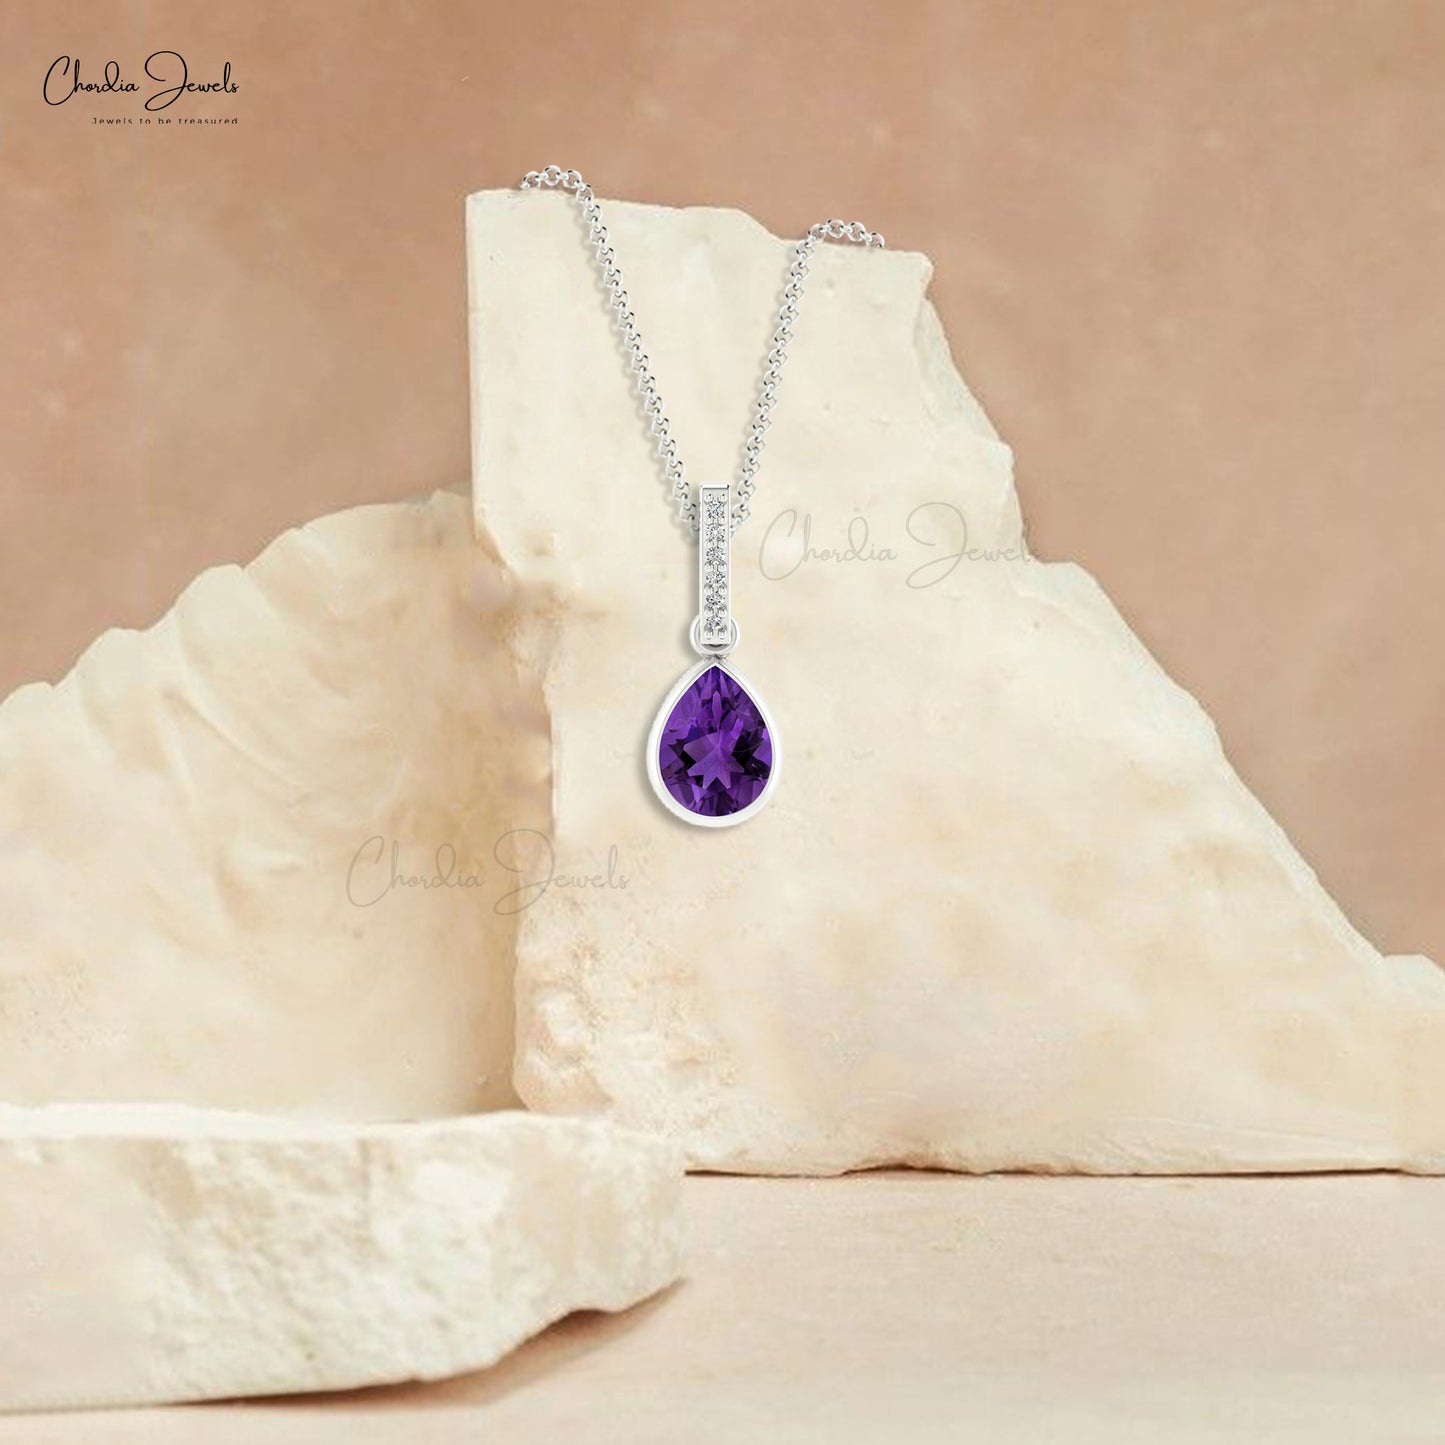 Natural Amethyst and Diamond Pendant, 14k Solid Gold Gemstone Pendant, 8x6mm Pear Shape Gemstone Pendant Gift for Wife